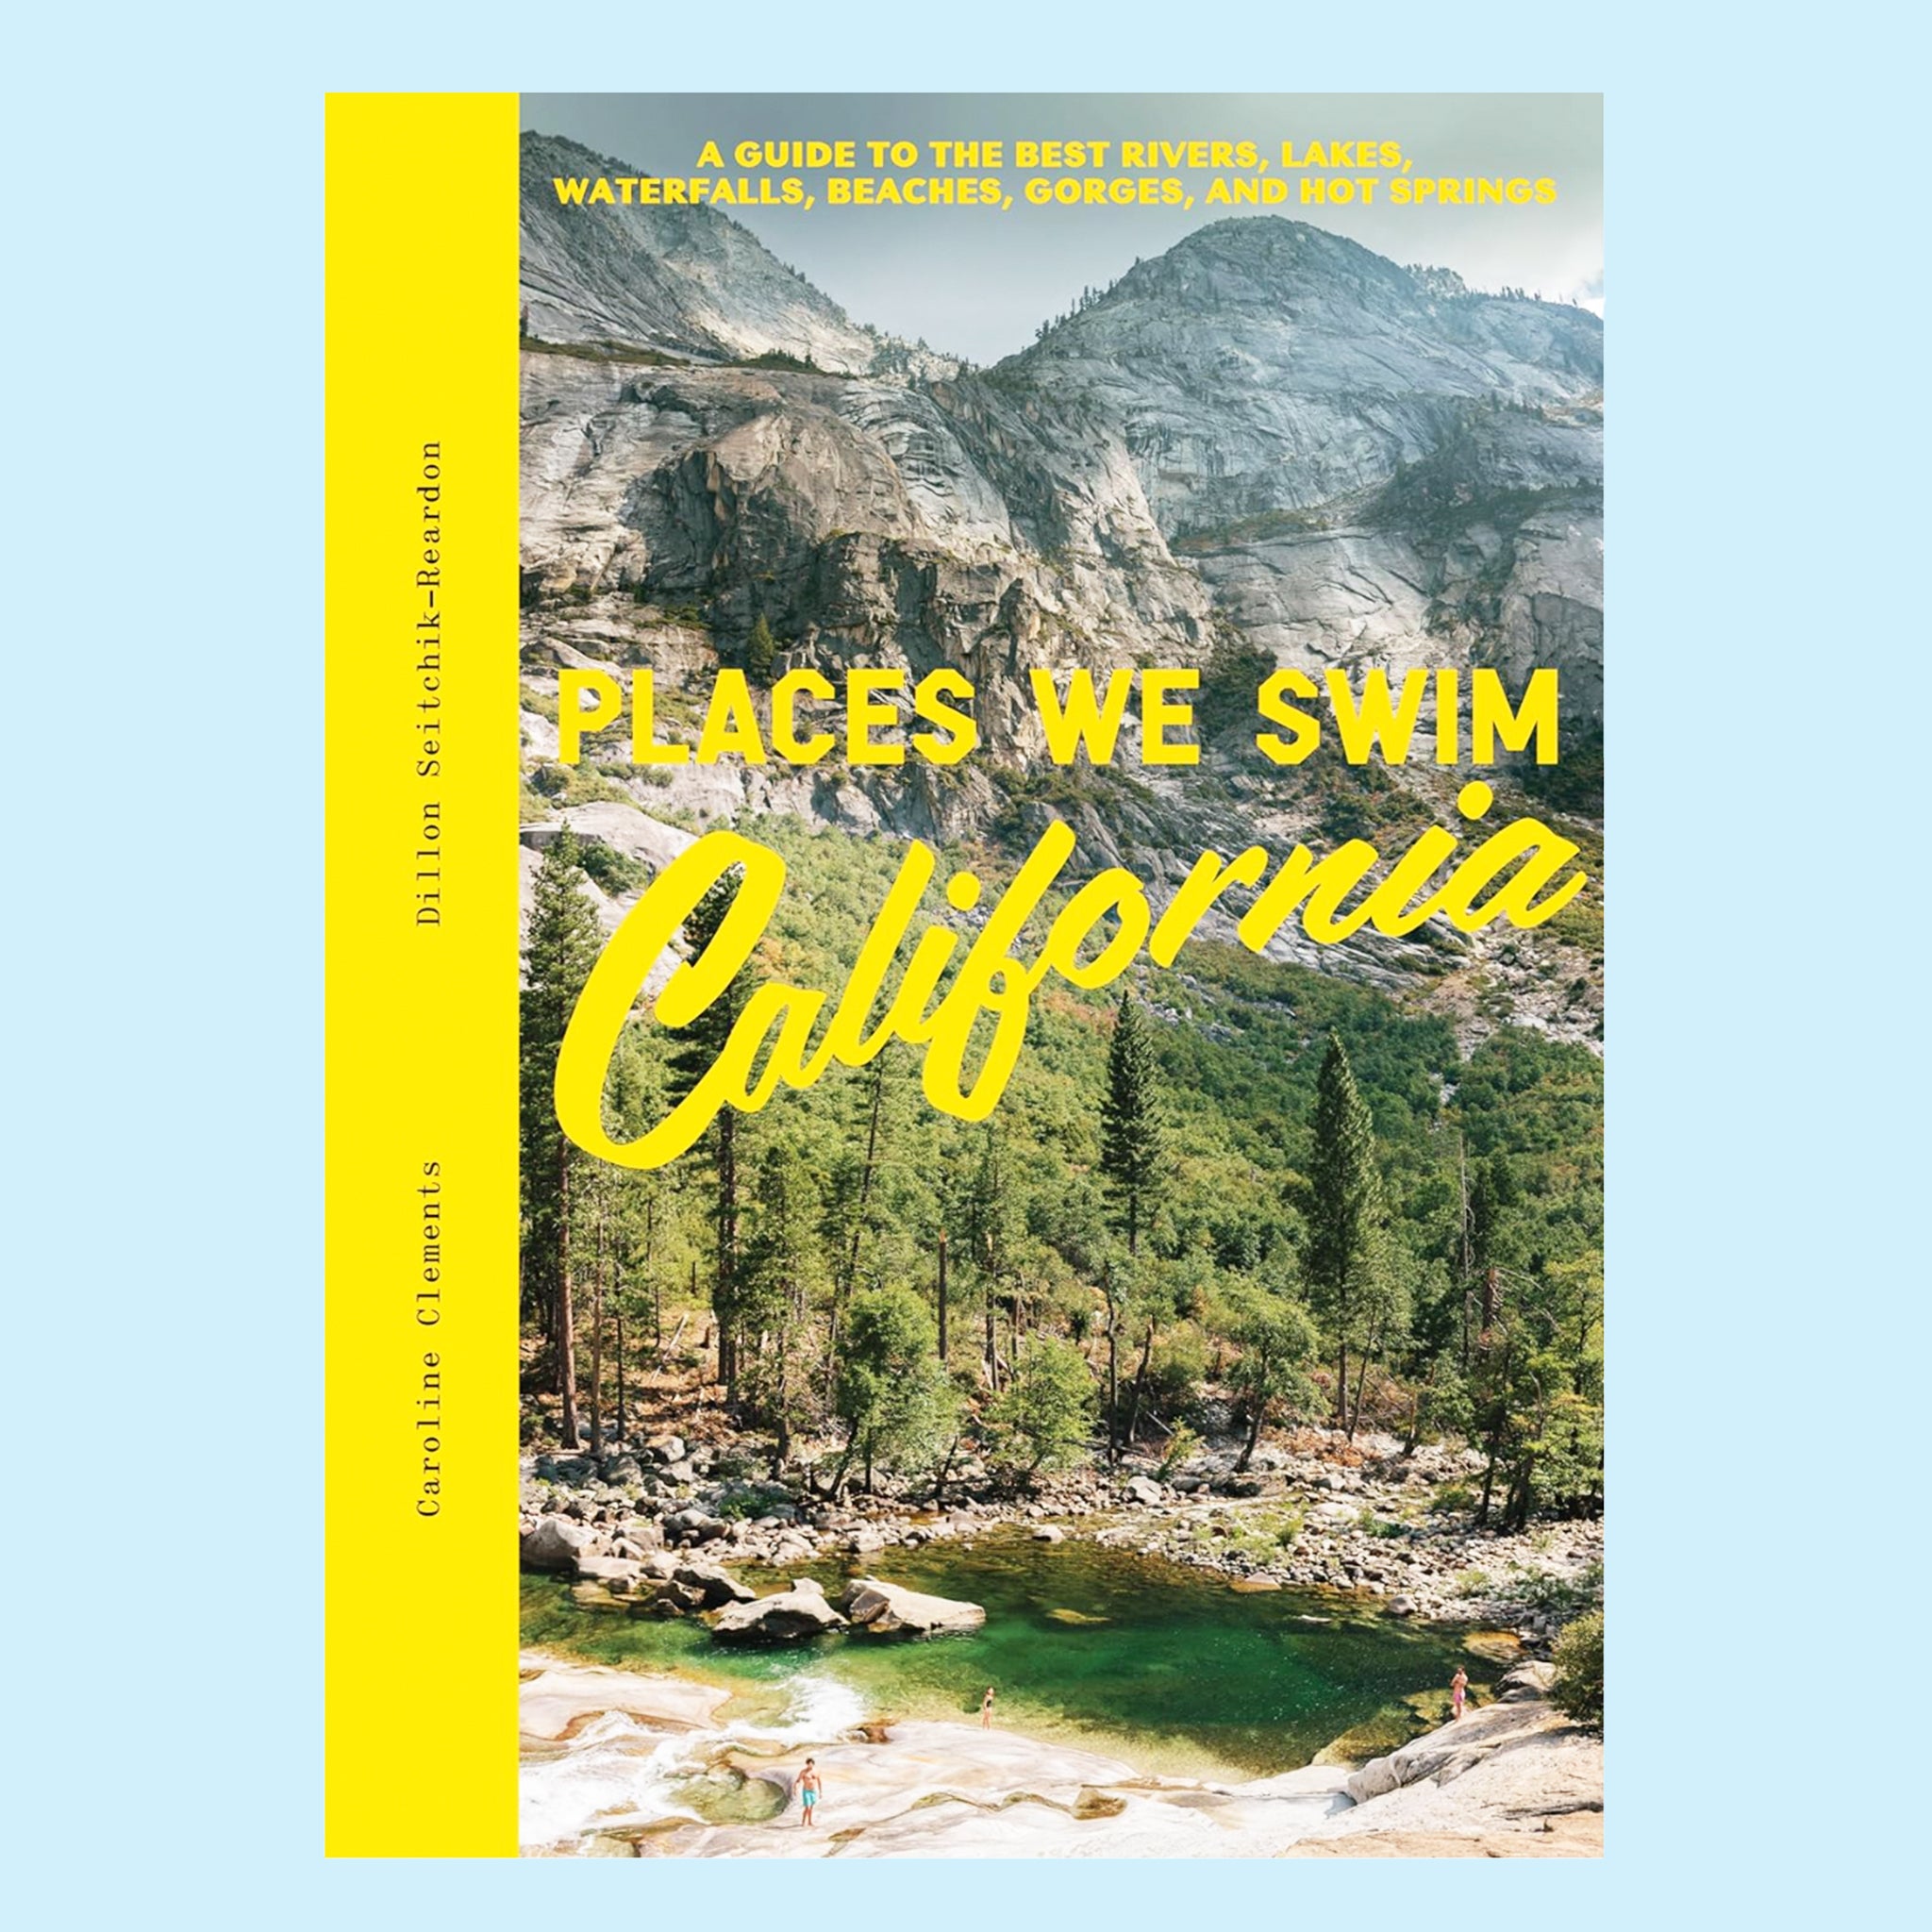 On a blue background is a neon yellow book cover with a photograph of a California mountain ridge and nature along with the title in the center that reads, "Place We Swim California". 